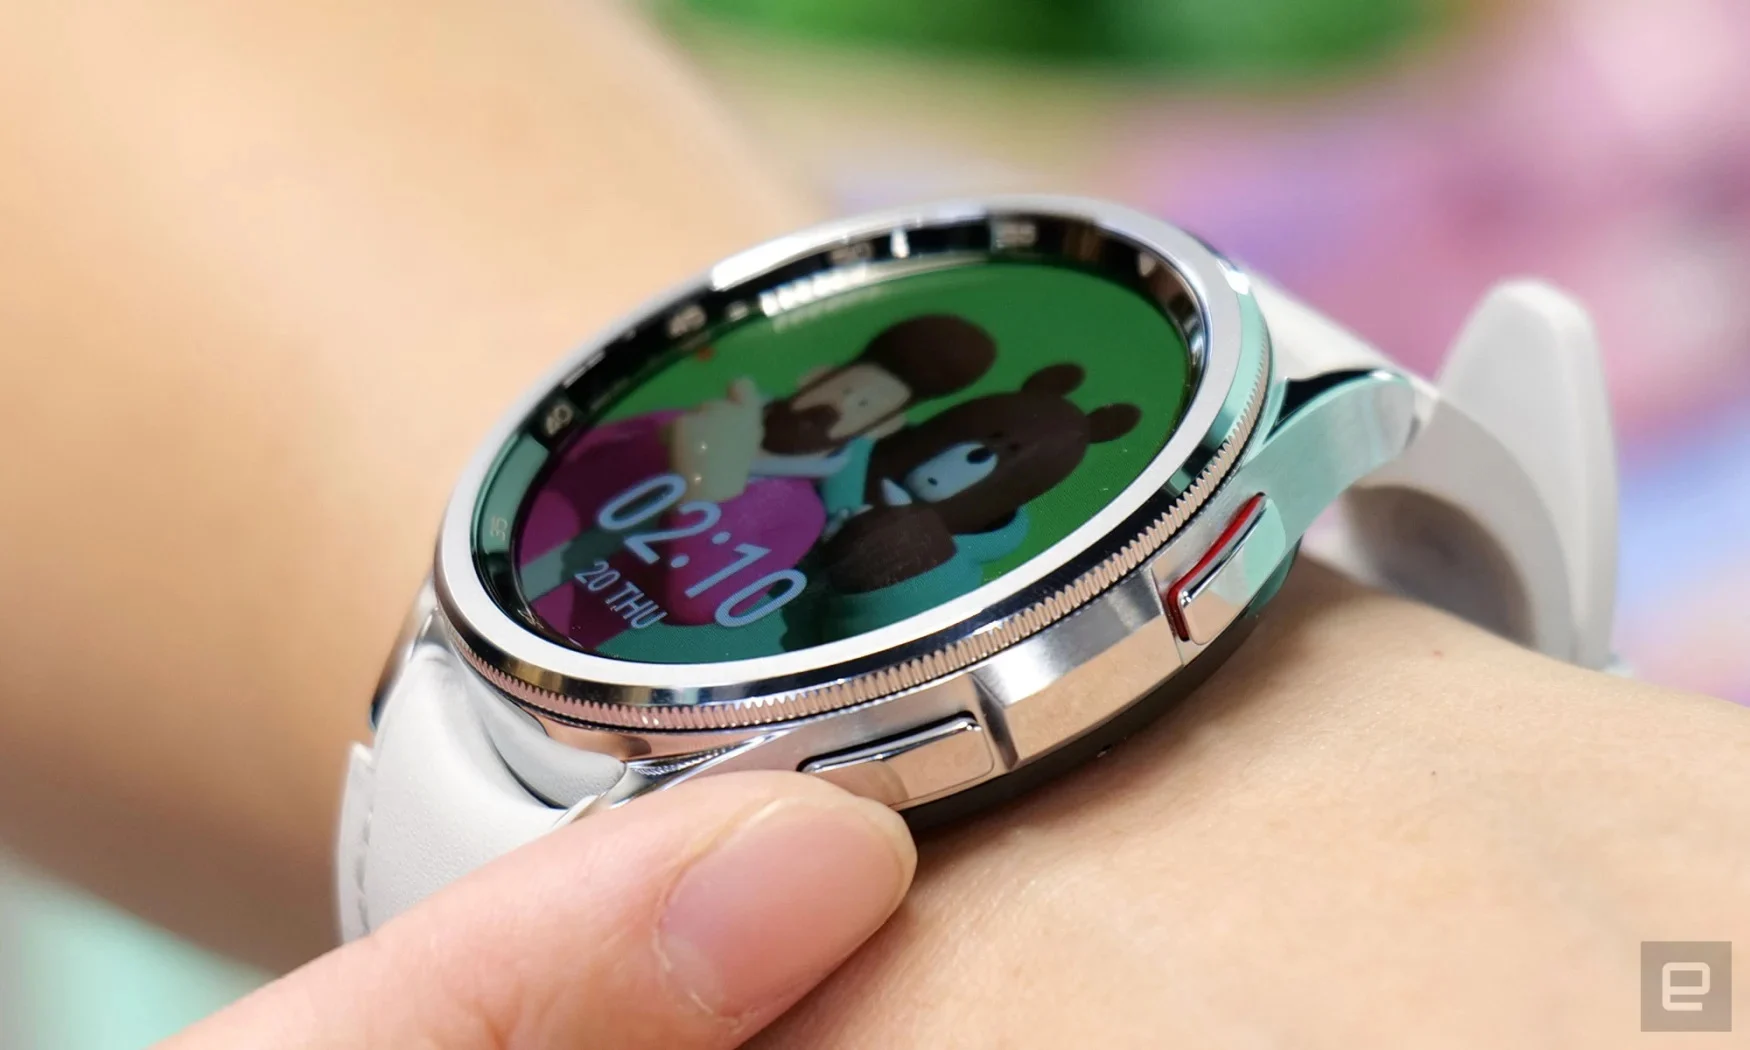 Closeup photo of a Samsung Galaxy Watch 6 smartwatch on a person's wrist. A finger is touching one of the hardware buttons as an image of a man with a teddy bear displays on its screen.